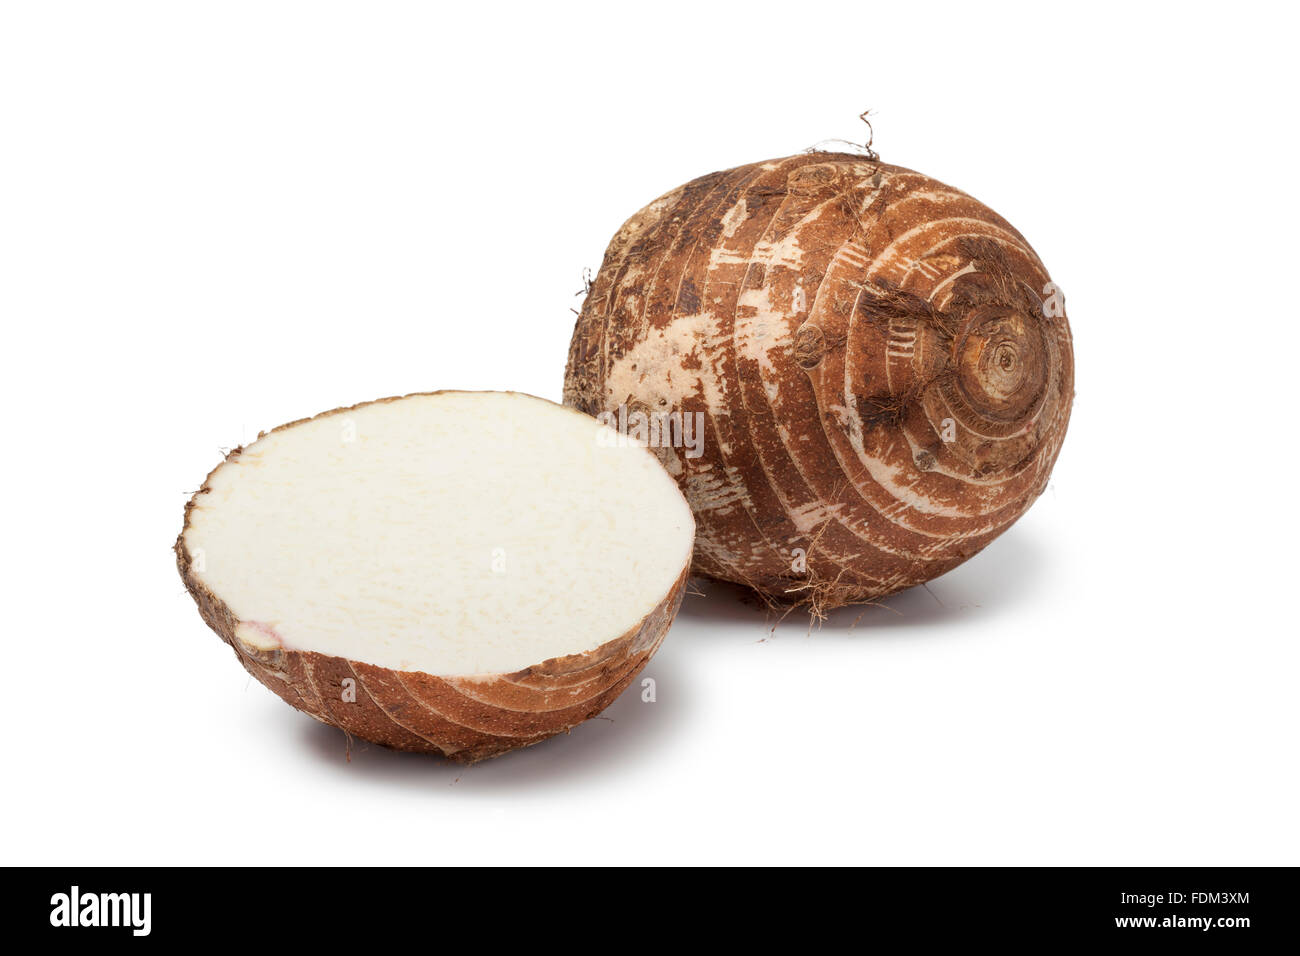 Whole and half fresh Chinese taro roots on whiet background Stock Photo